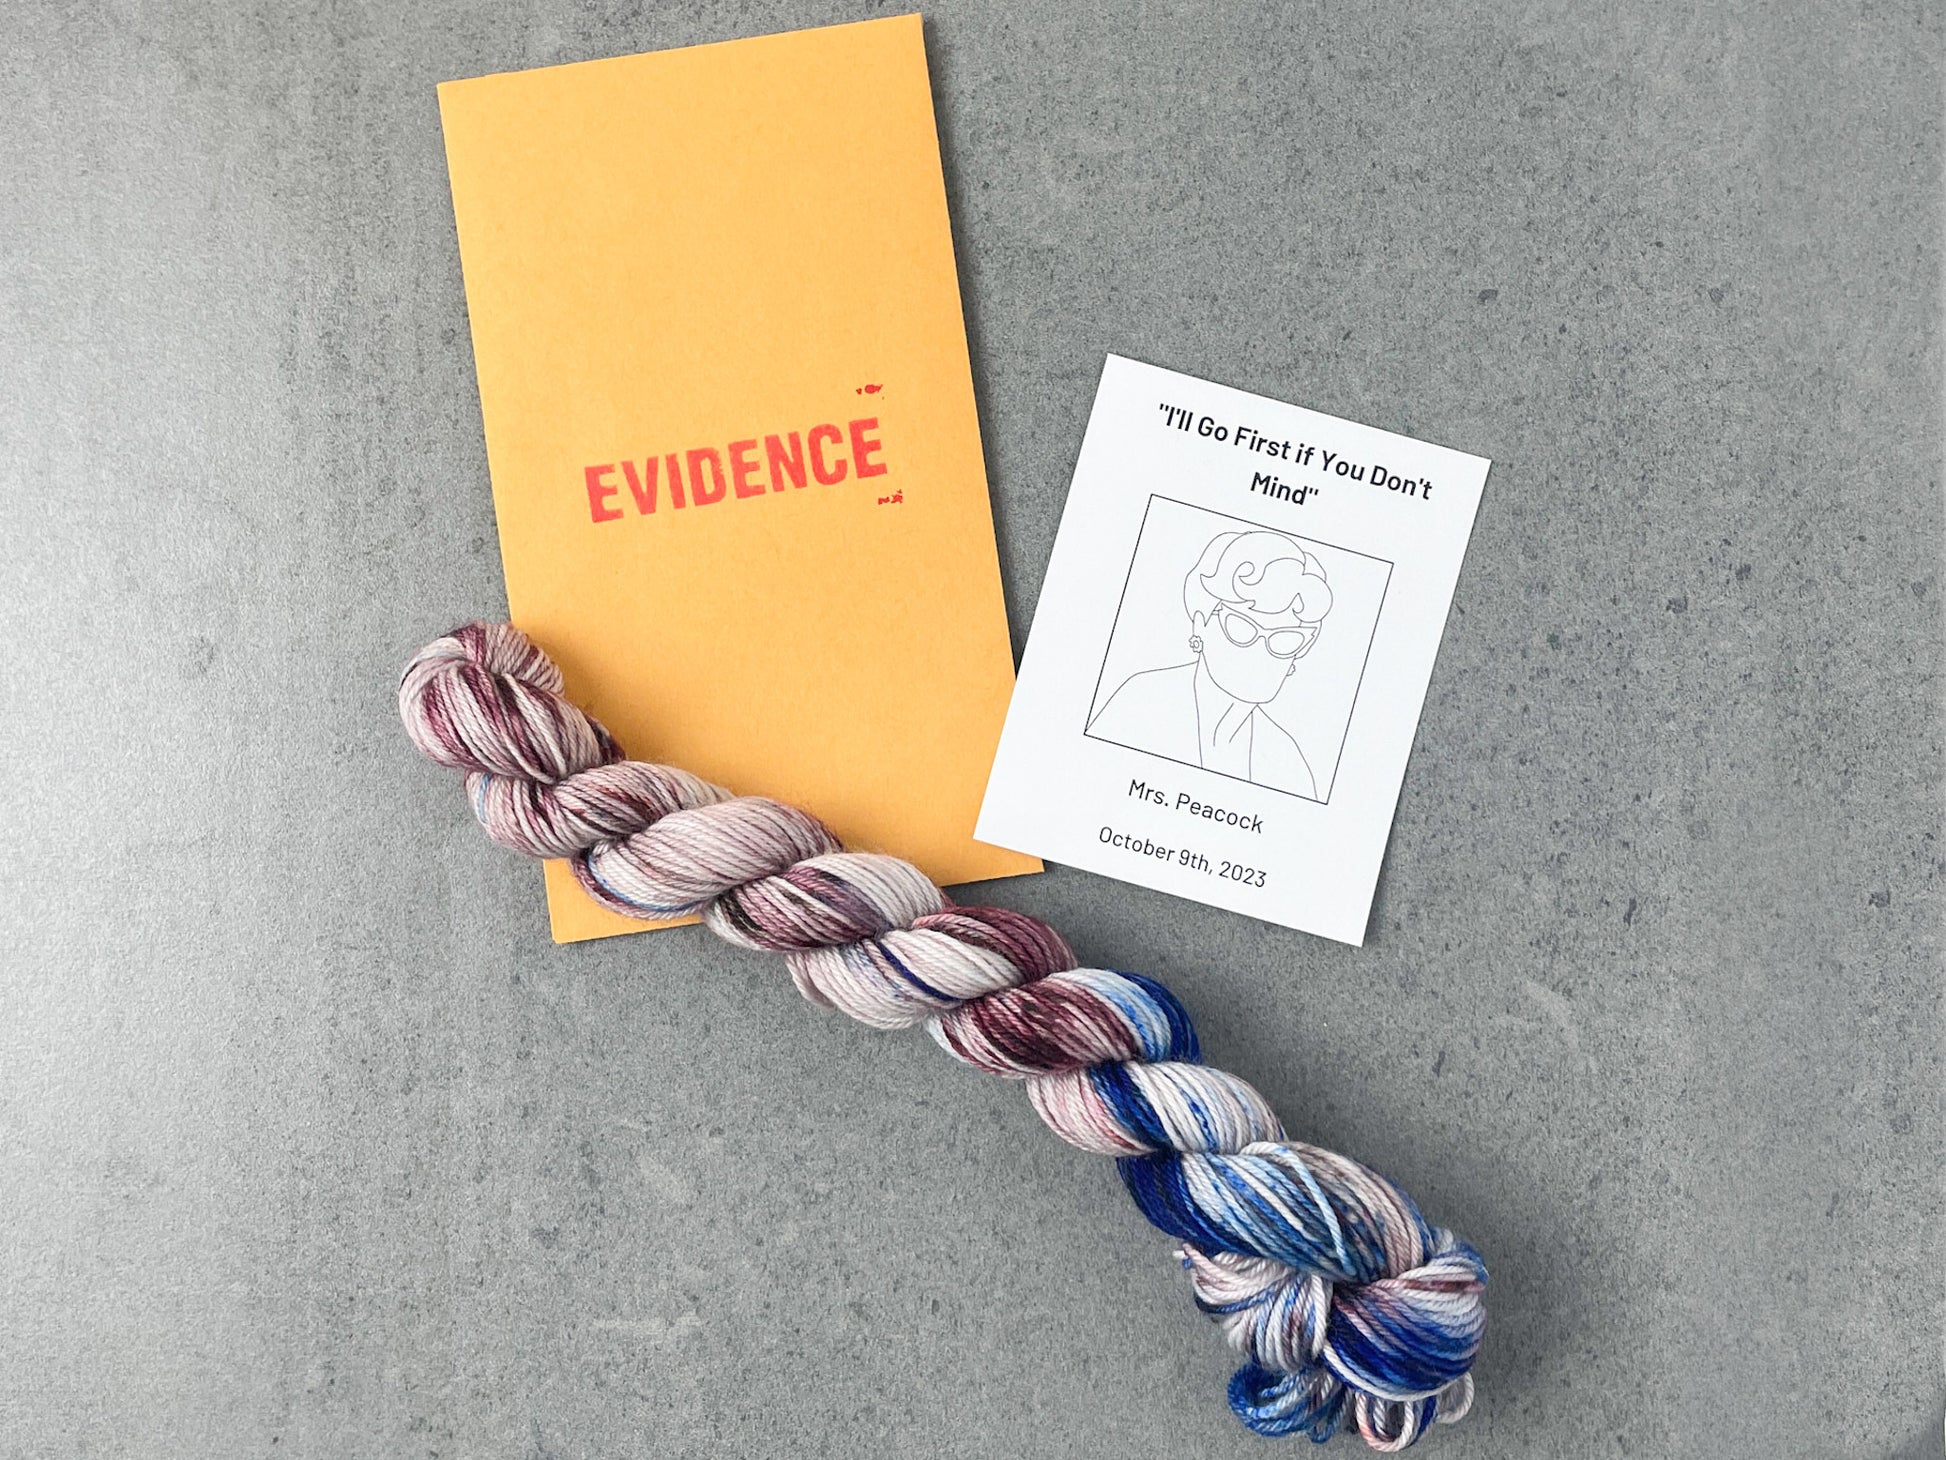 A skein of blue and purple yarn on top of an envelope stamped with "Evidence" and a card with a drawing of Mrs. Peacock on it.